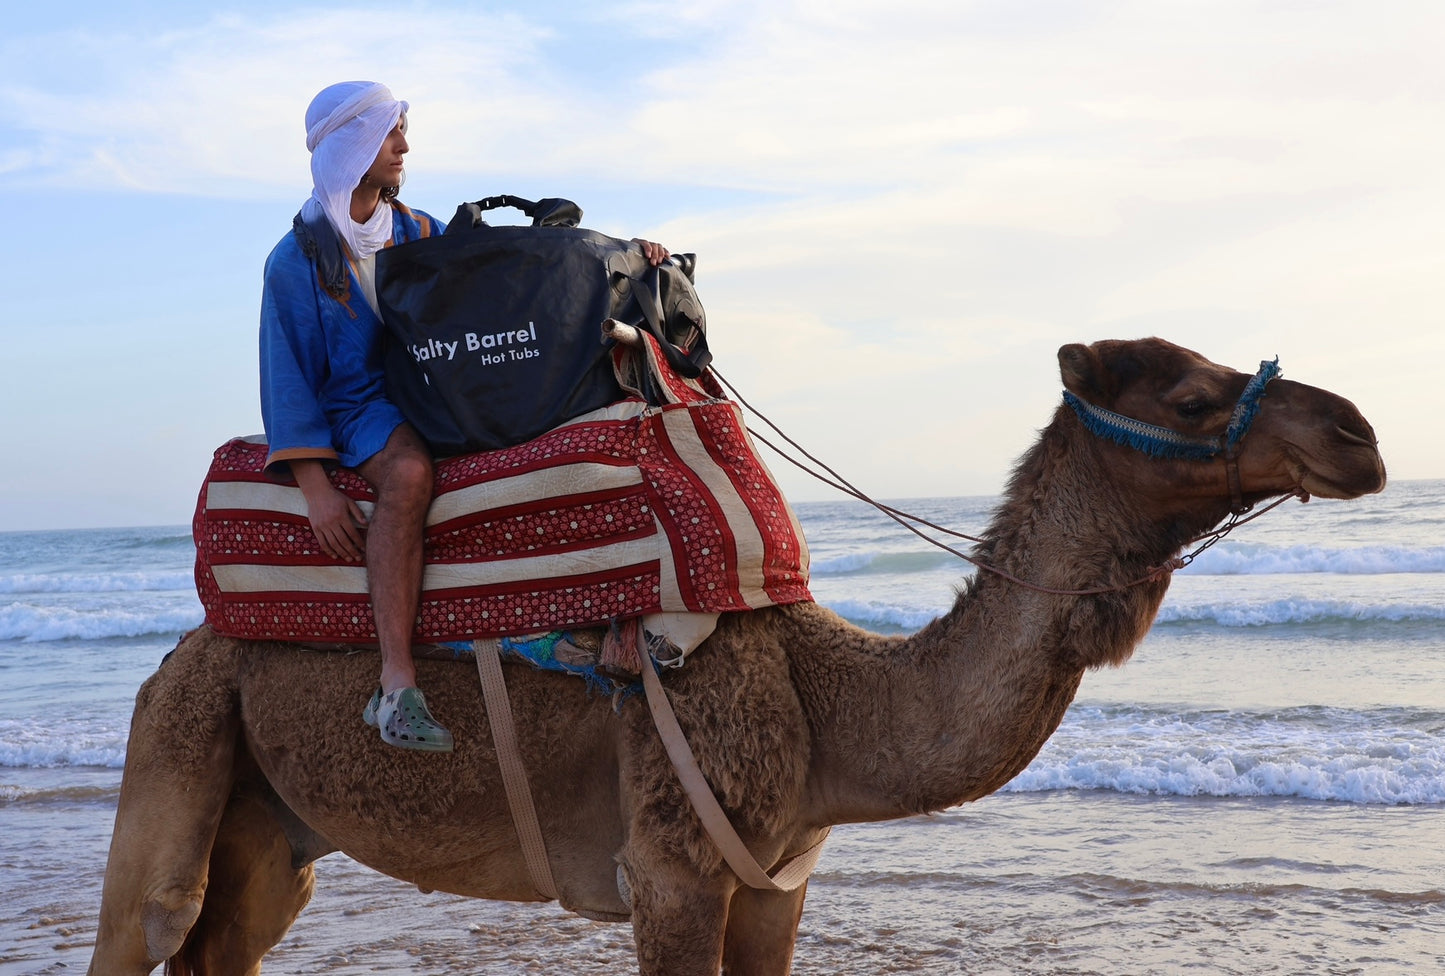 Transporting The Salty Barrel by camel